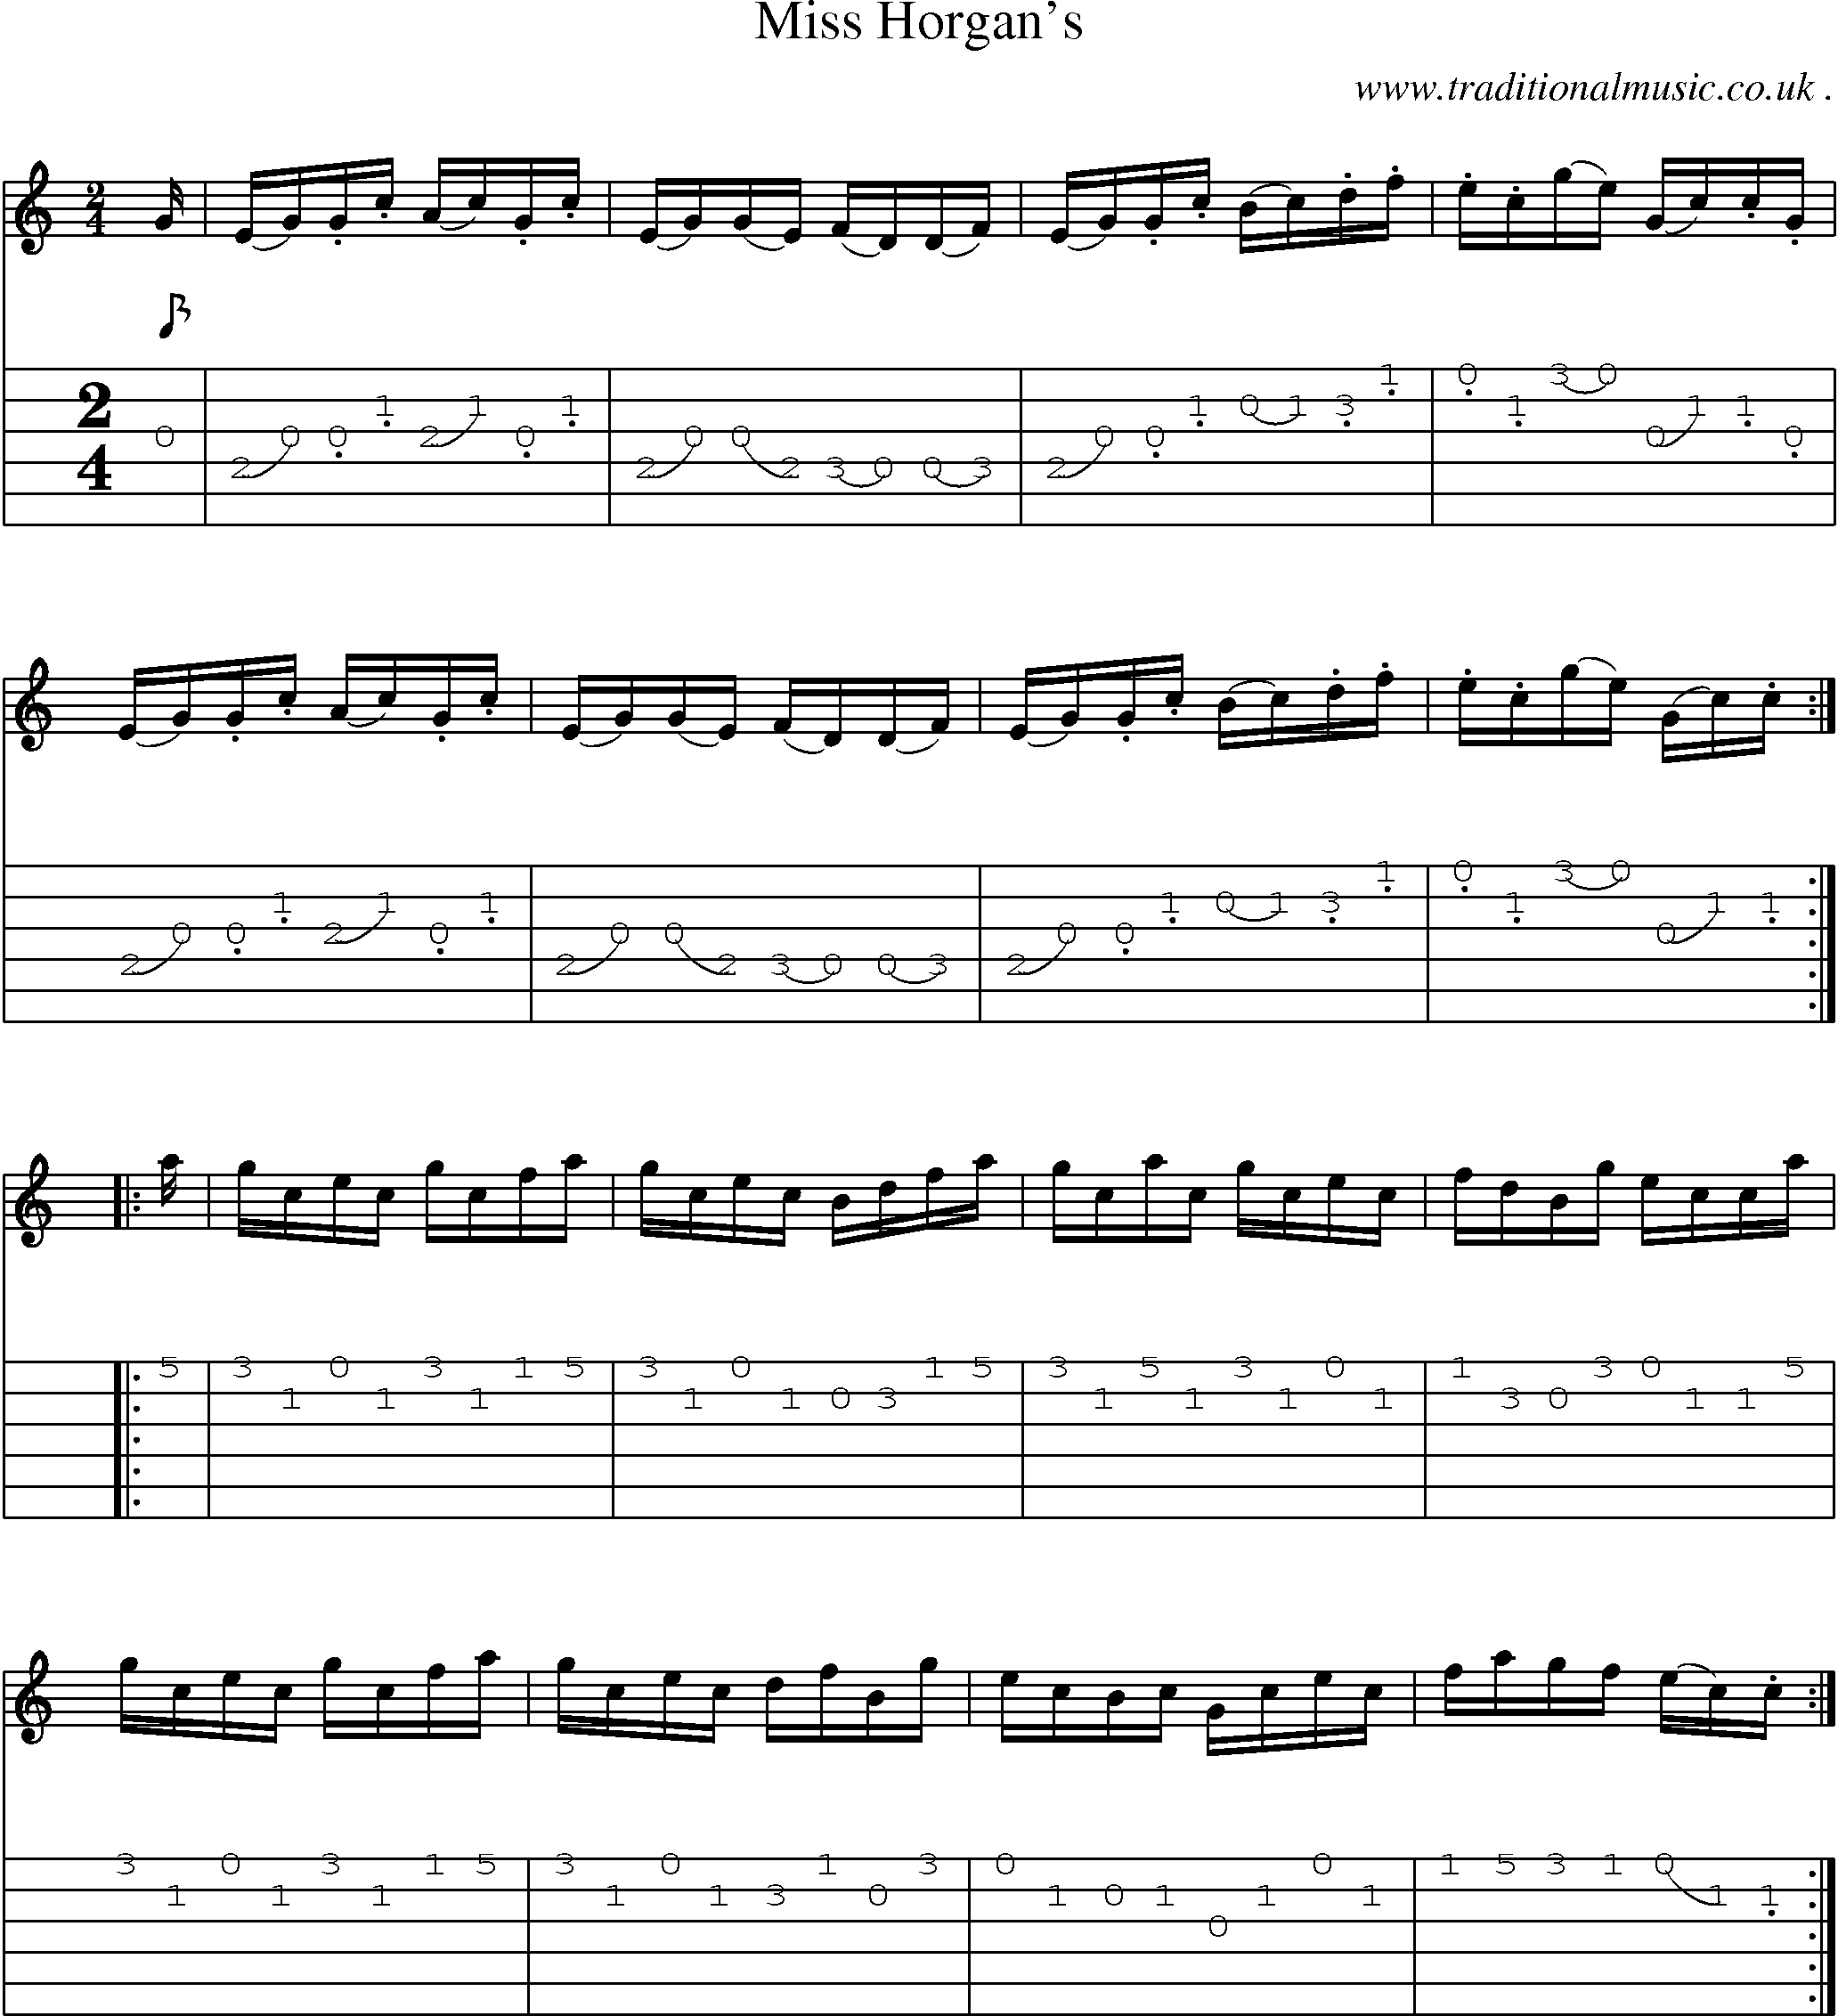 Sheet-Music and Guitar Tabs for Miss Horgans